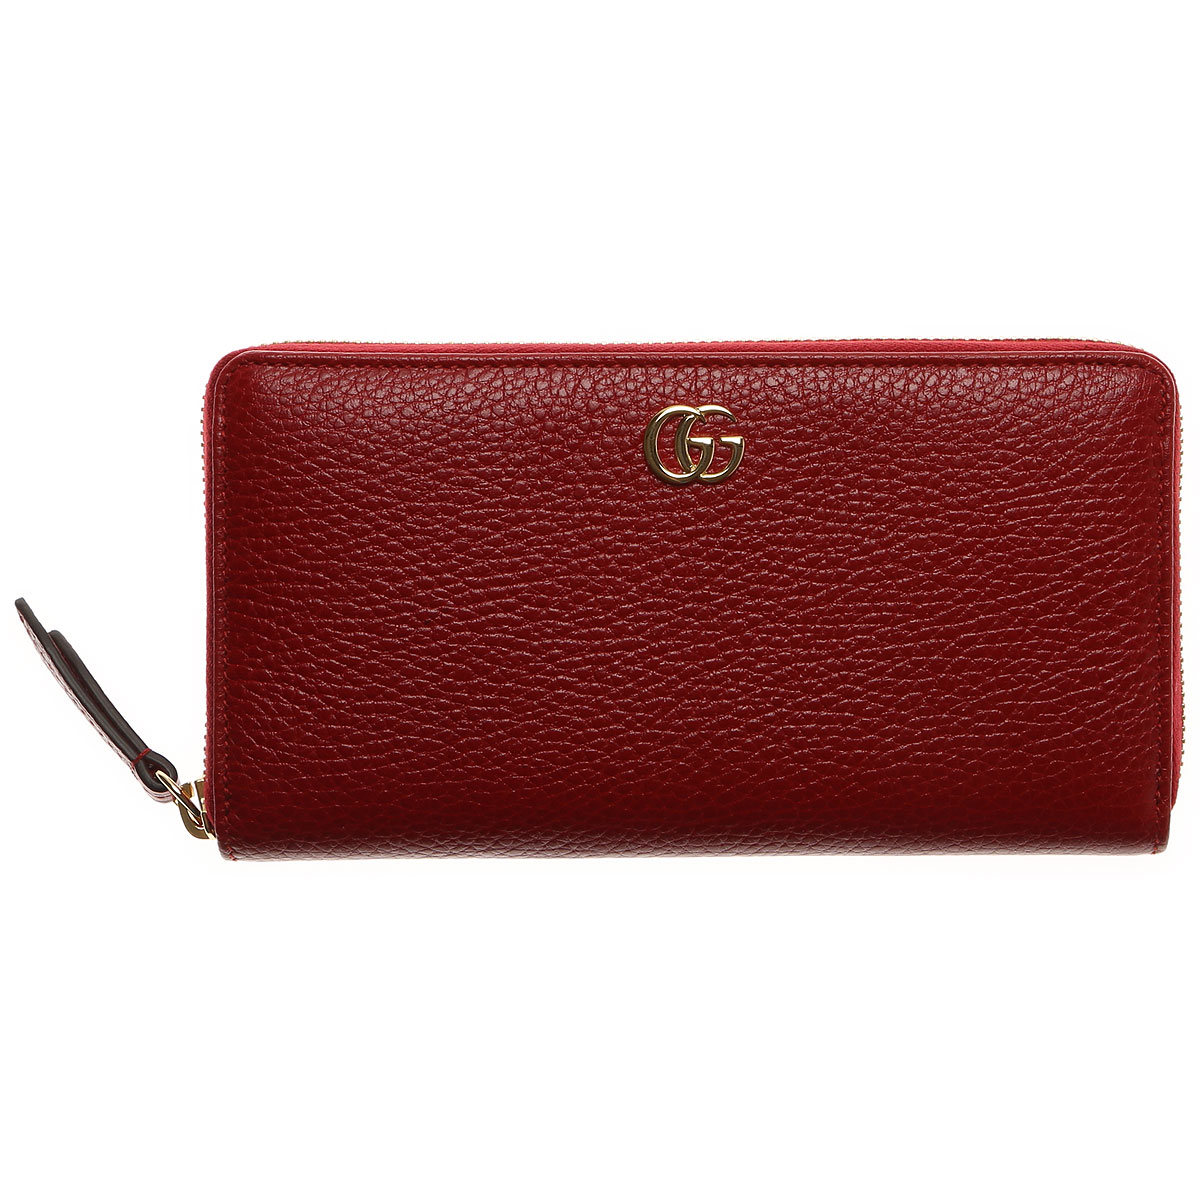 Womens Wallets Gucci, Style code: 456117-ca00g-6433